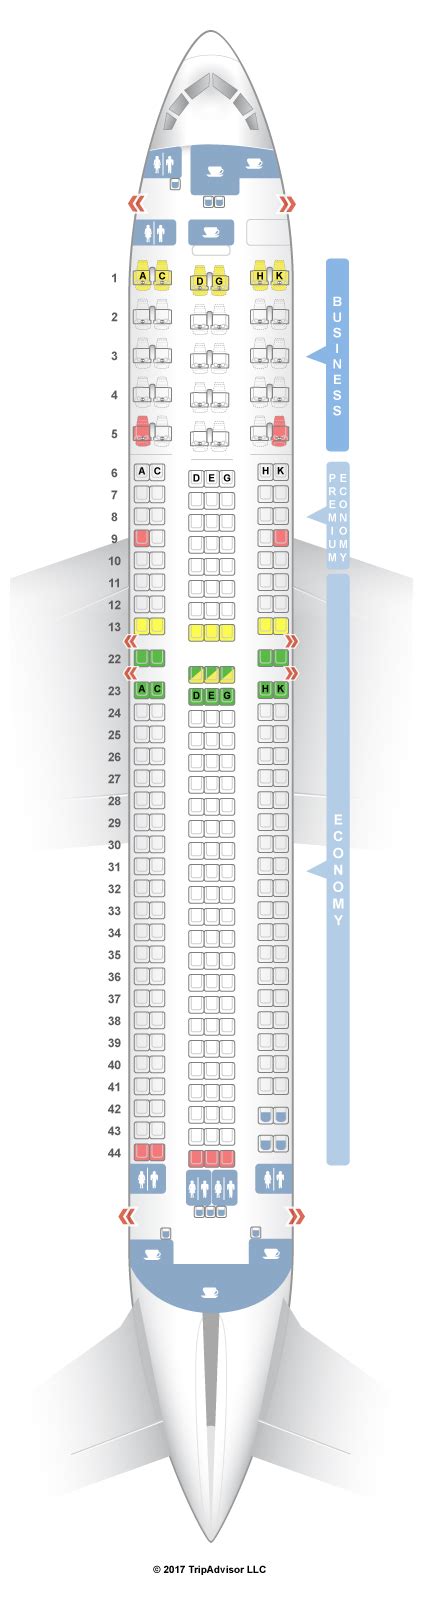 Condor airlines seat map. Wingspan: 34.10 m. Width of cabin: 3.70 m. Video monitors: In every 3rd row on the cabin ceiling. Airbus A321-200 Boeing 757-300. Discover the comfort and innovation of Condor's Airbus A320-200 fleet. Experience a smooth journey with exceptional amenities on board. 